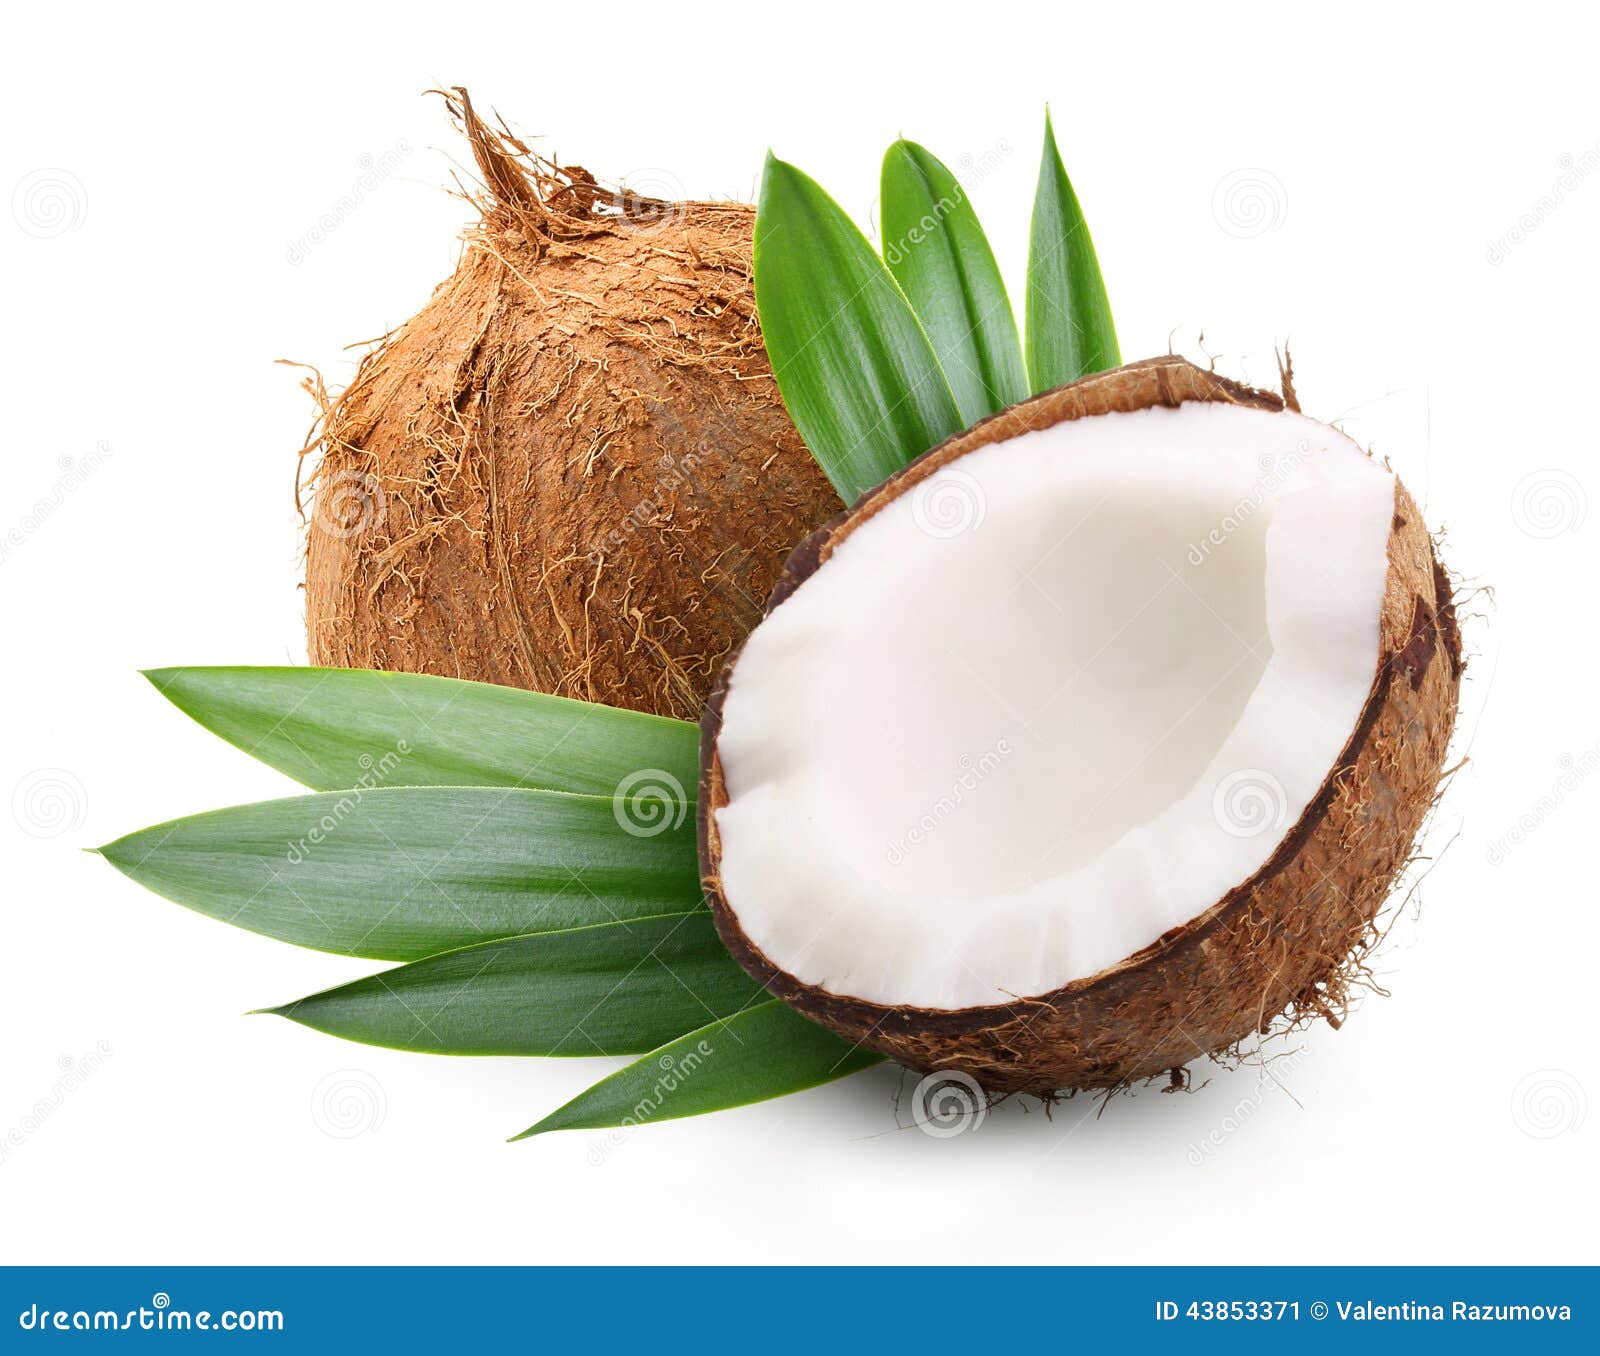 coconut with palm leaves